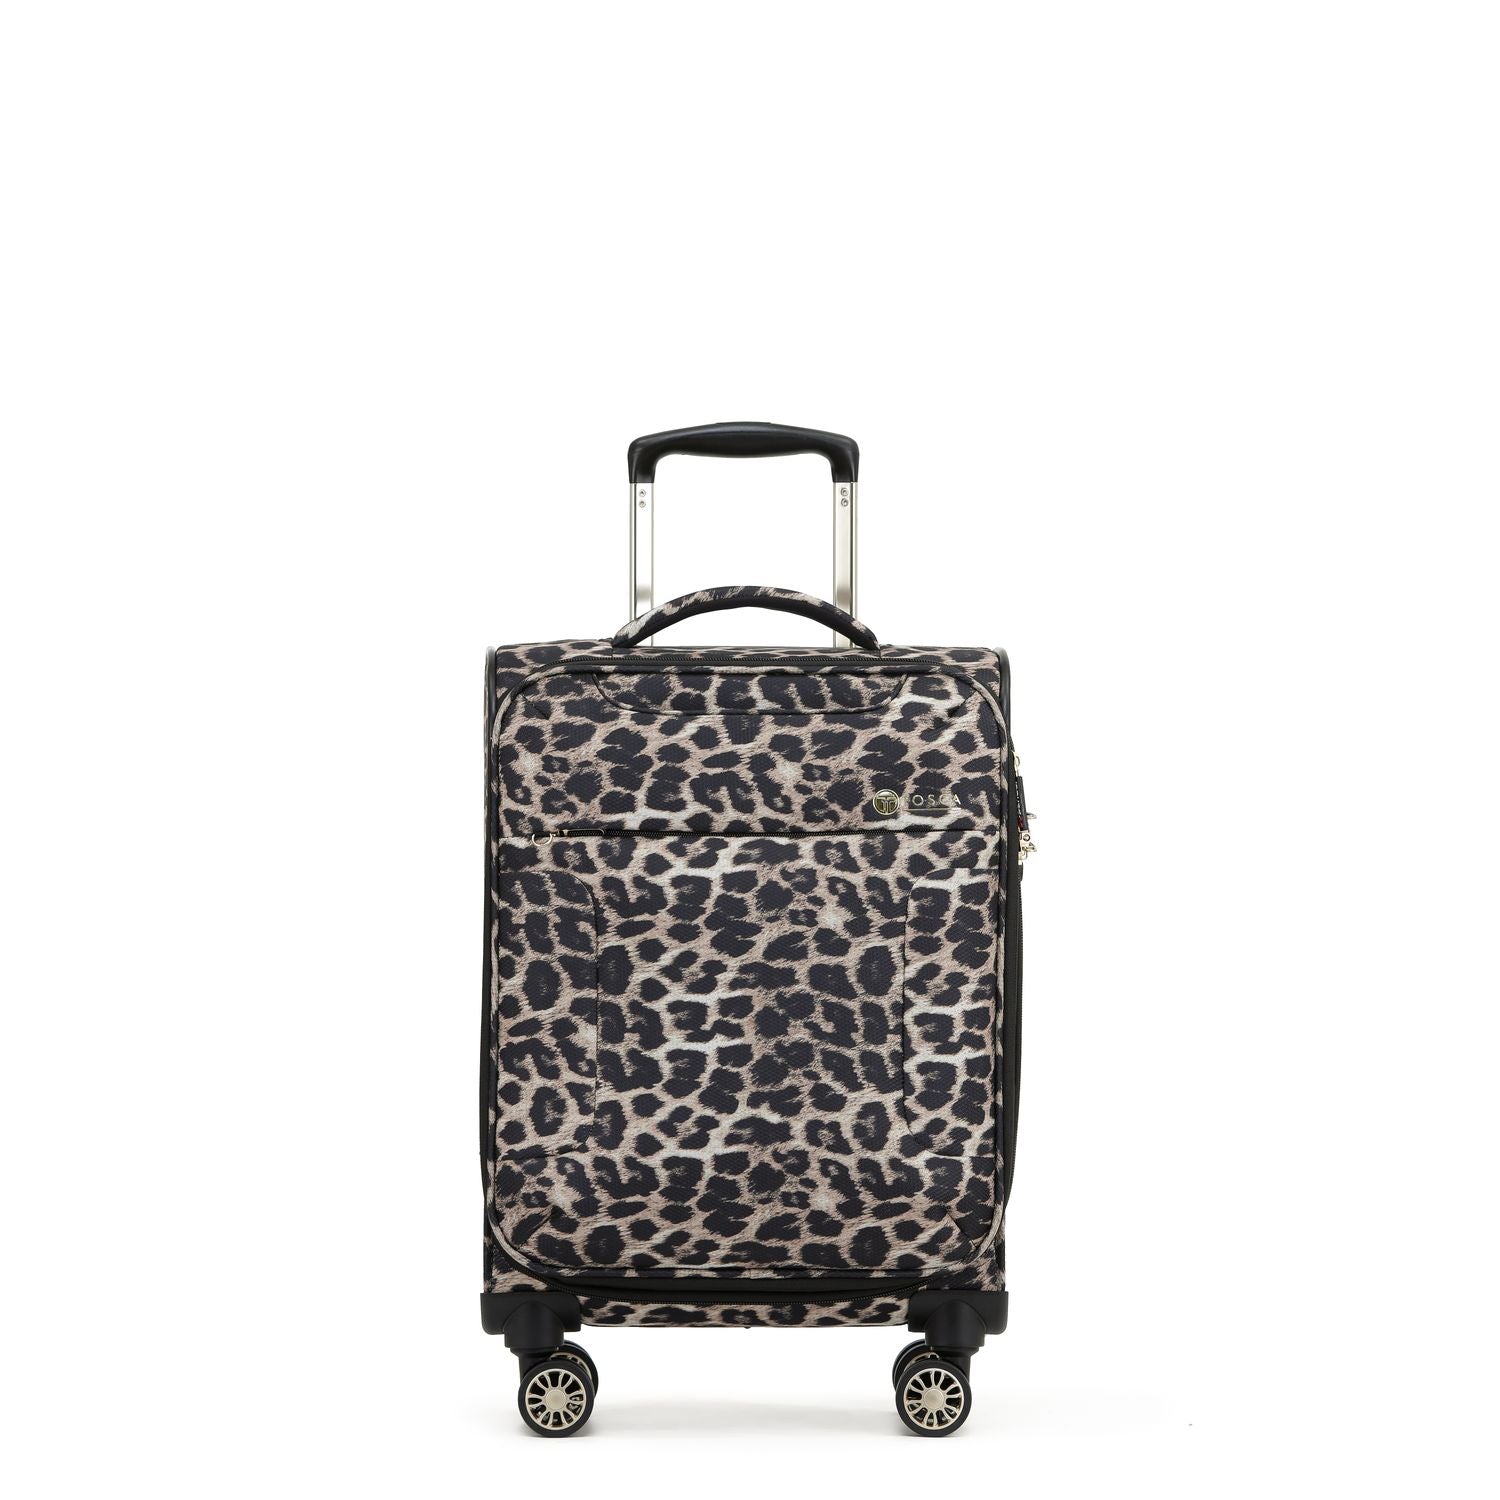 Tosca - So Lite 3.0 20in Small 4 Wheel Soft Suitcase - Leopard